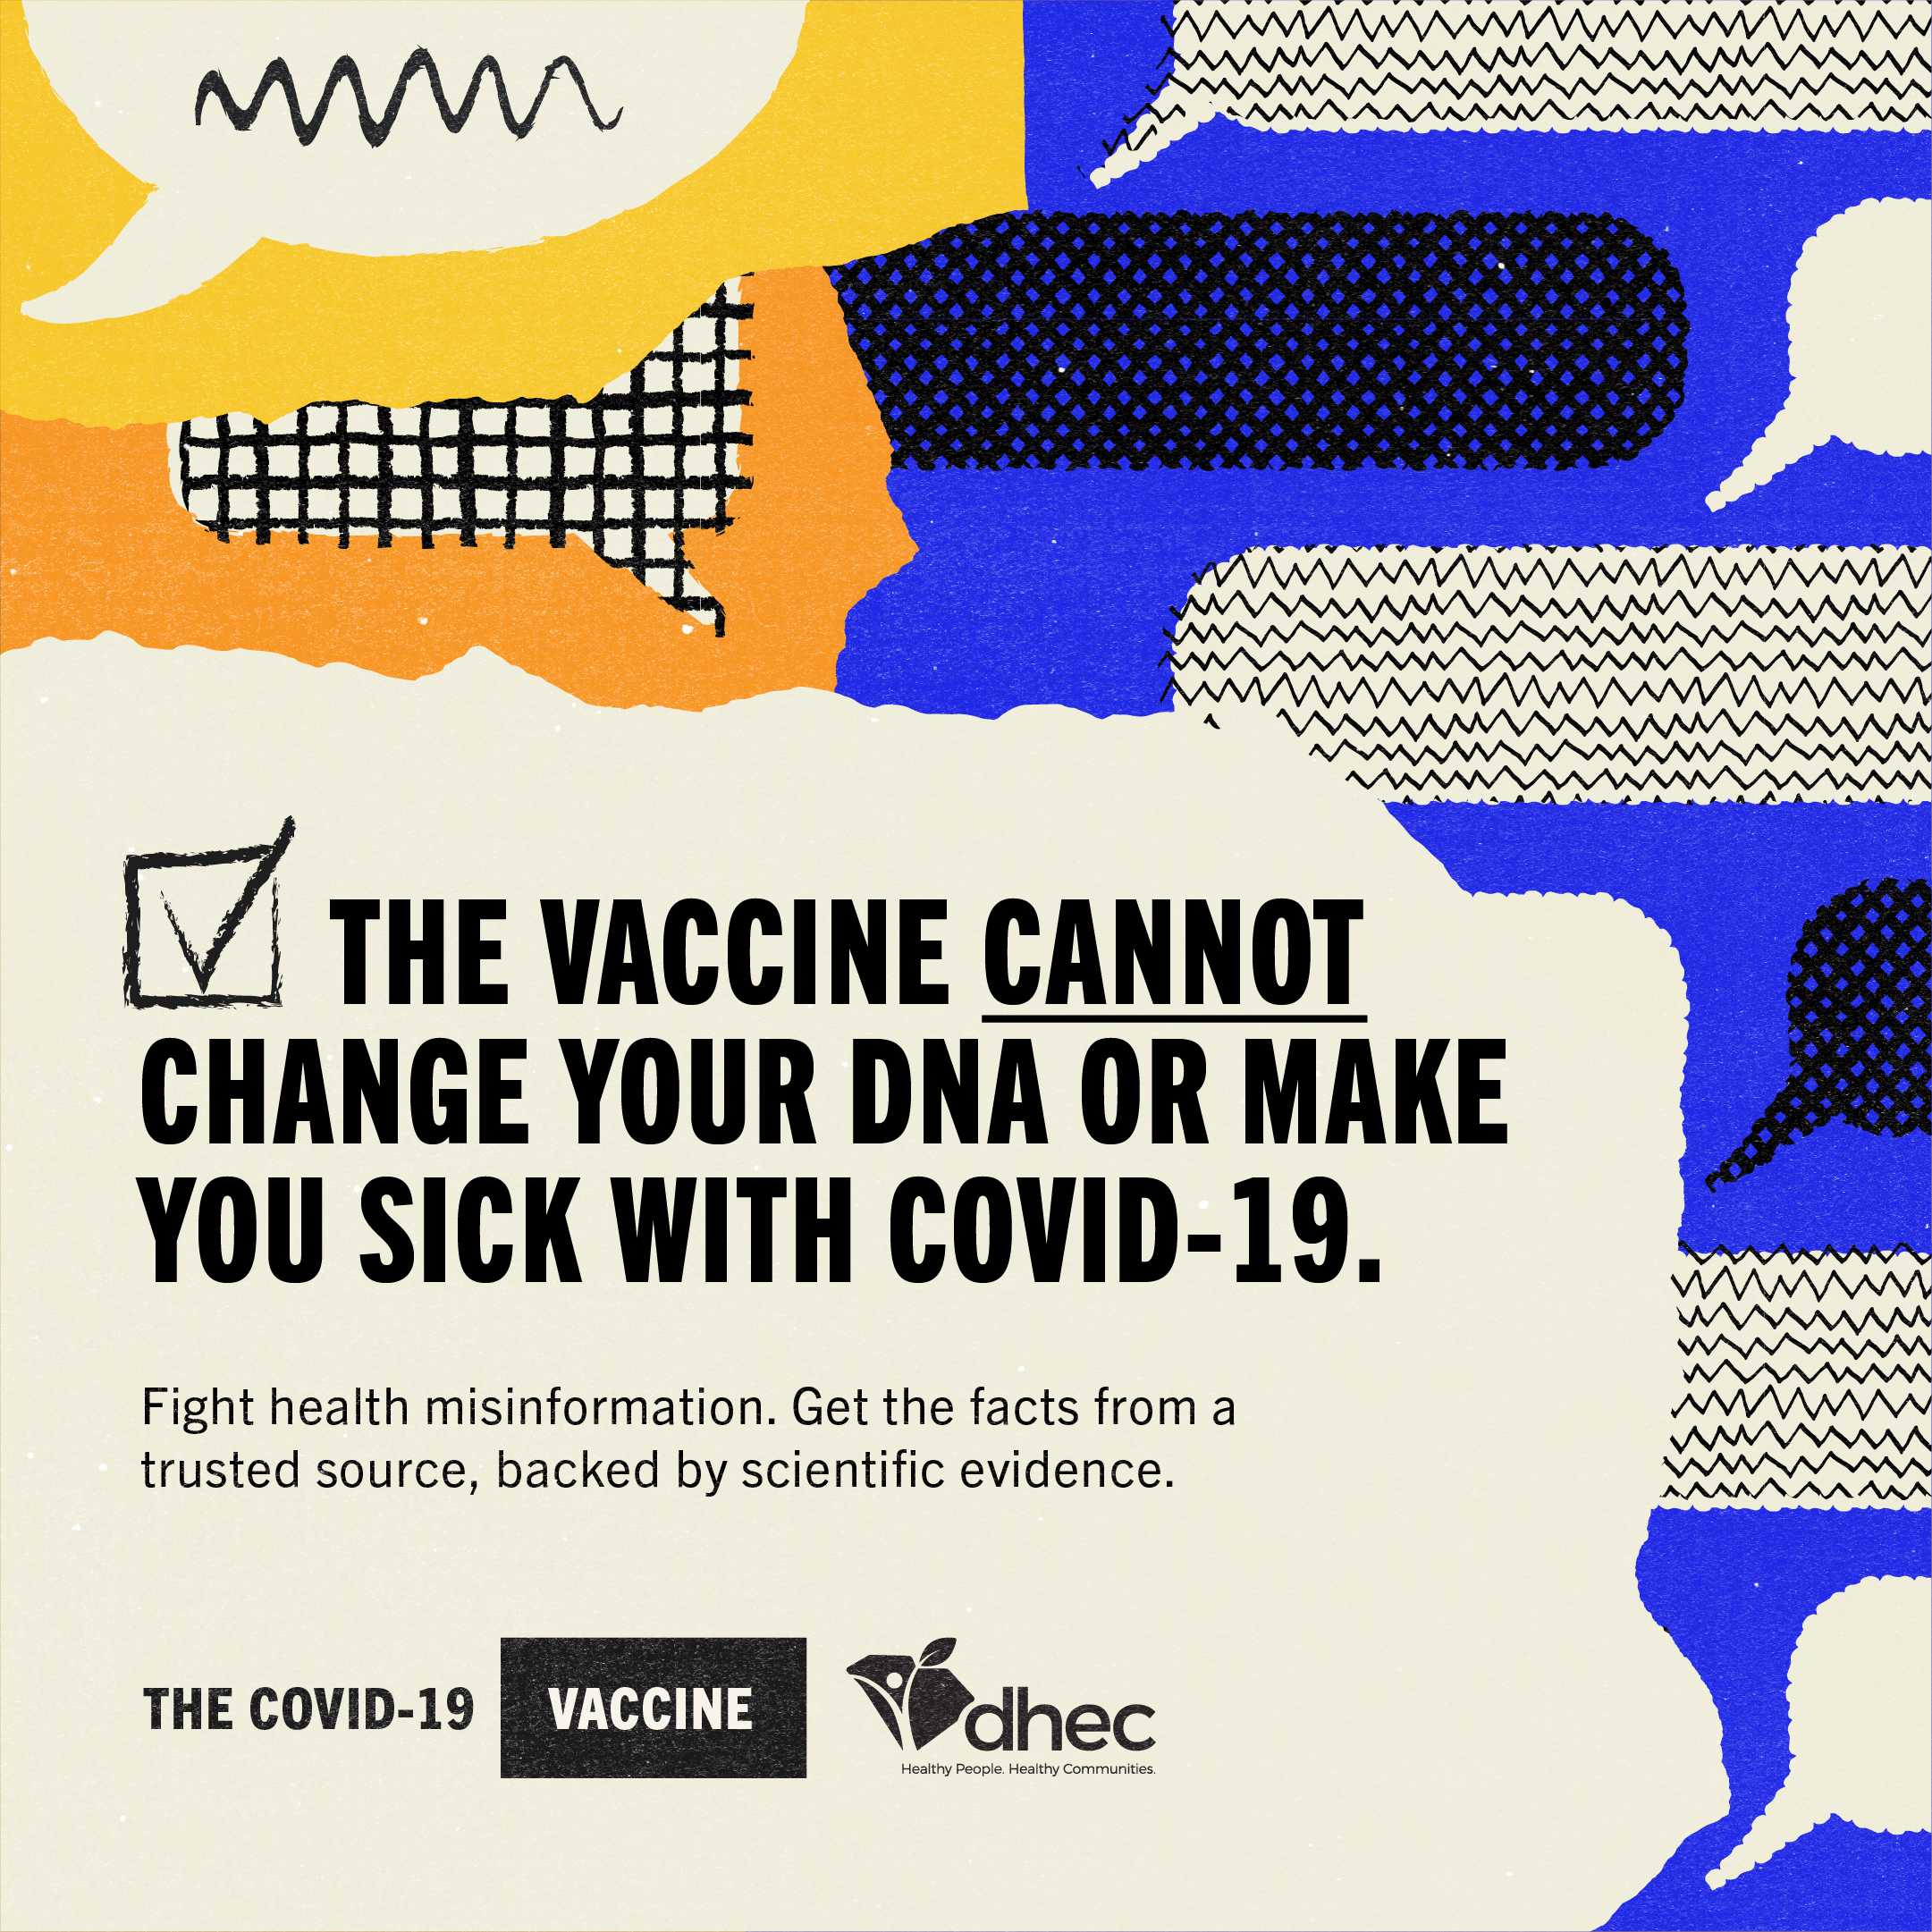 The vaccine CANNOT change your DNA or make you sick with COVID-19.